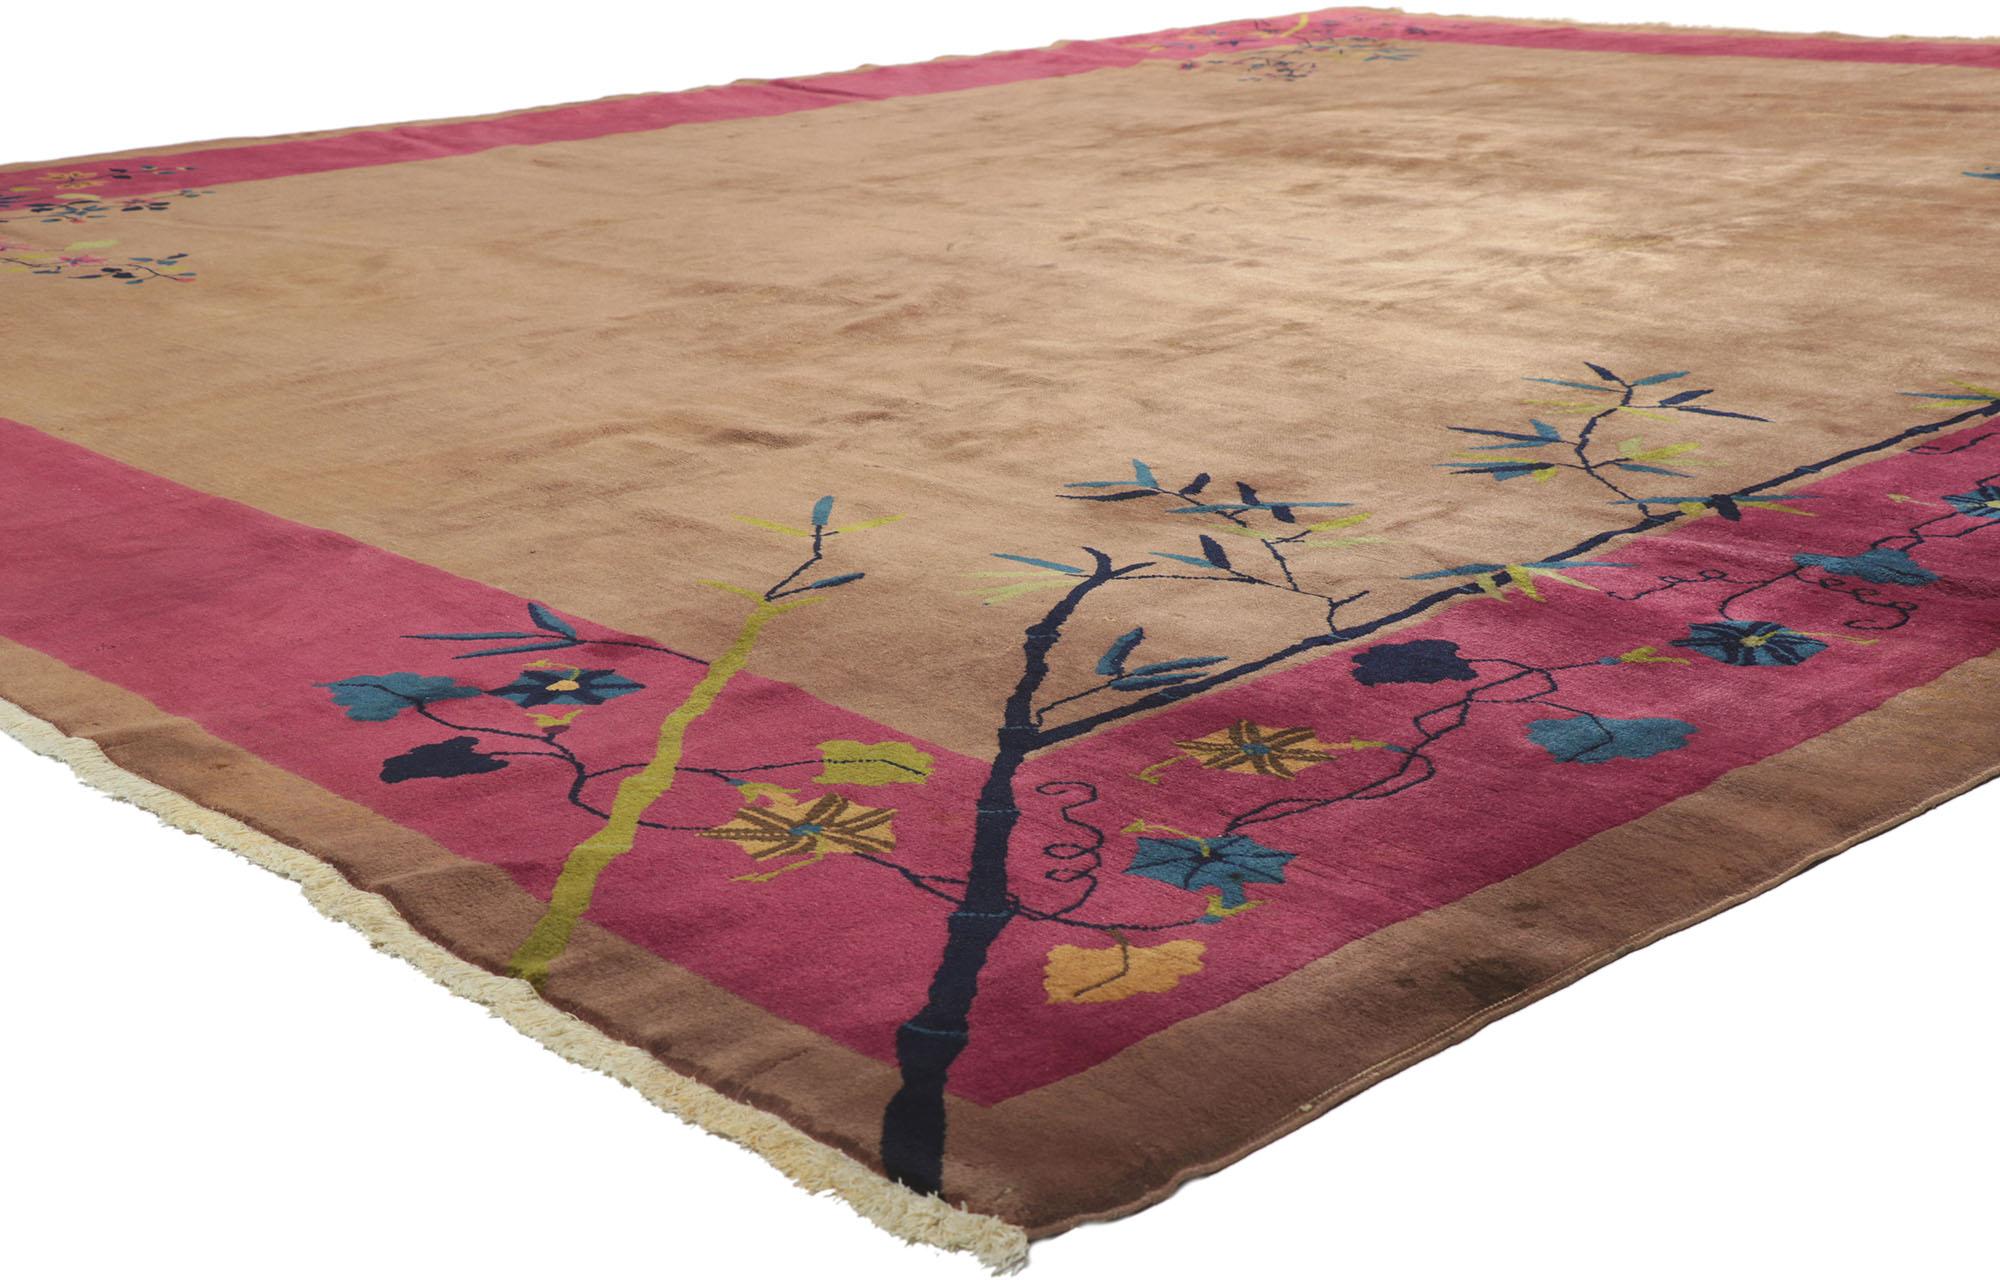 78243 Antique Chinese Art Deco Rug, 11'10 X 14'00. This hand knotted wool antique Chinese Art Deco rug features a color-blocked field and border scheme festooned with glorious sprays of flowers. Lotuses, peonies, chrysanthemums, and plum blossoms